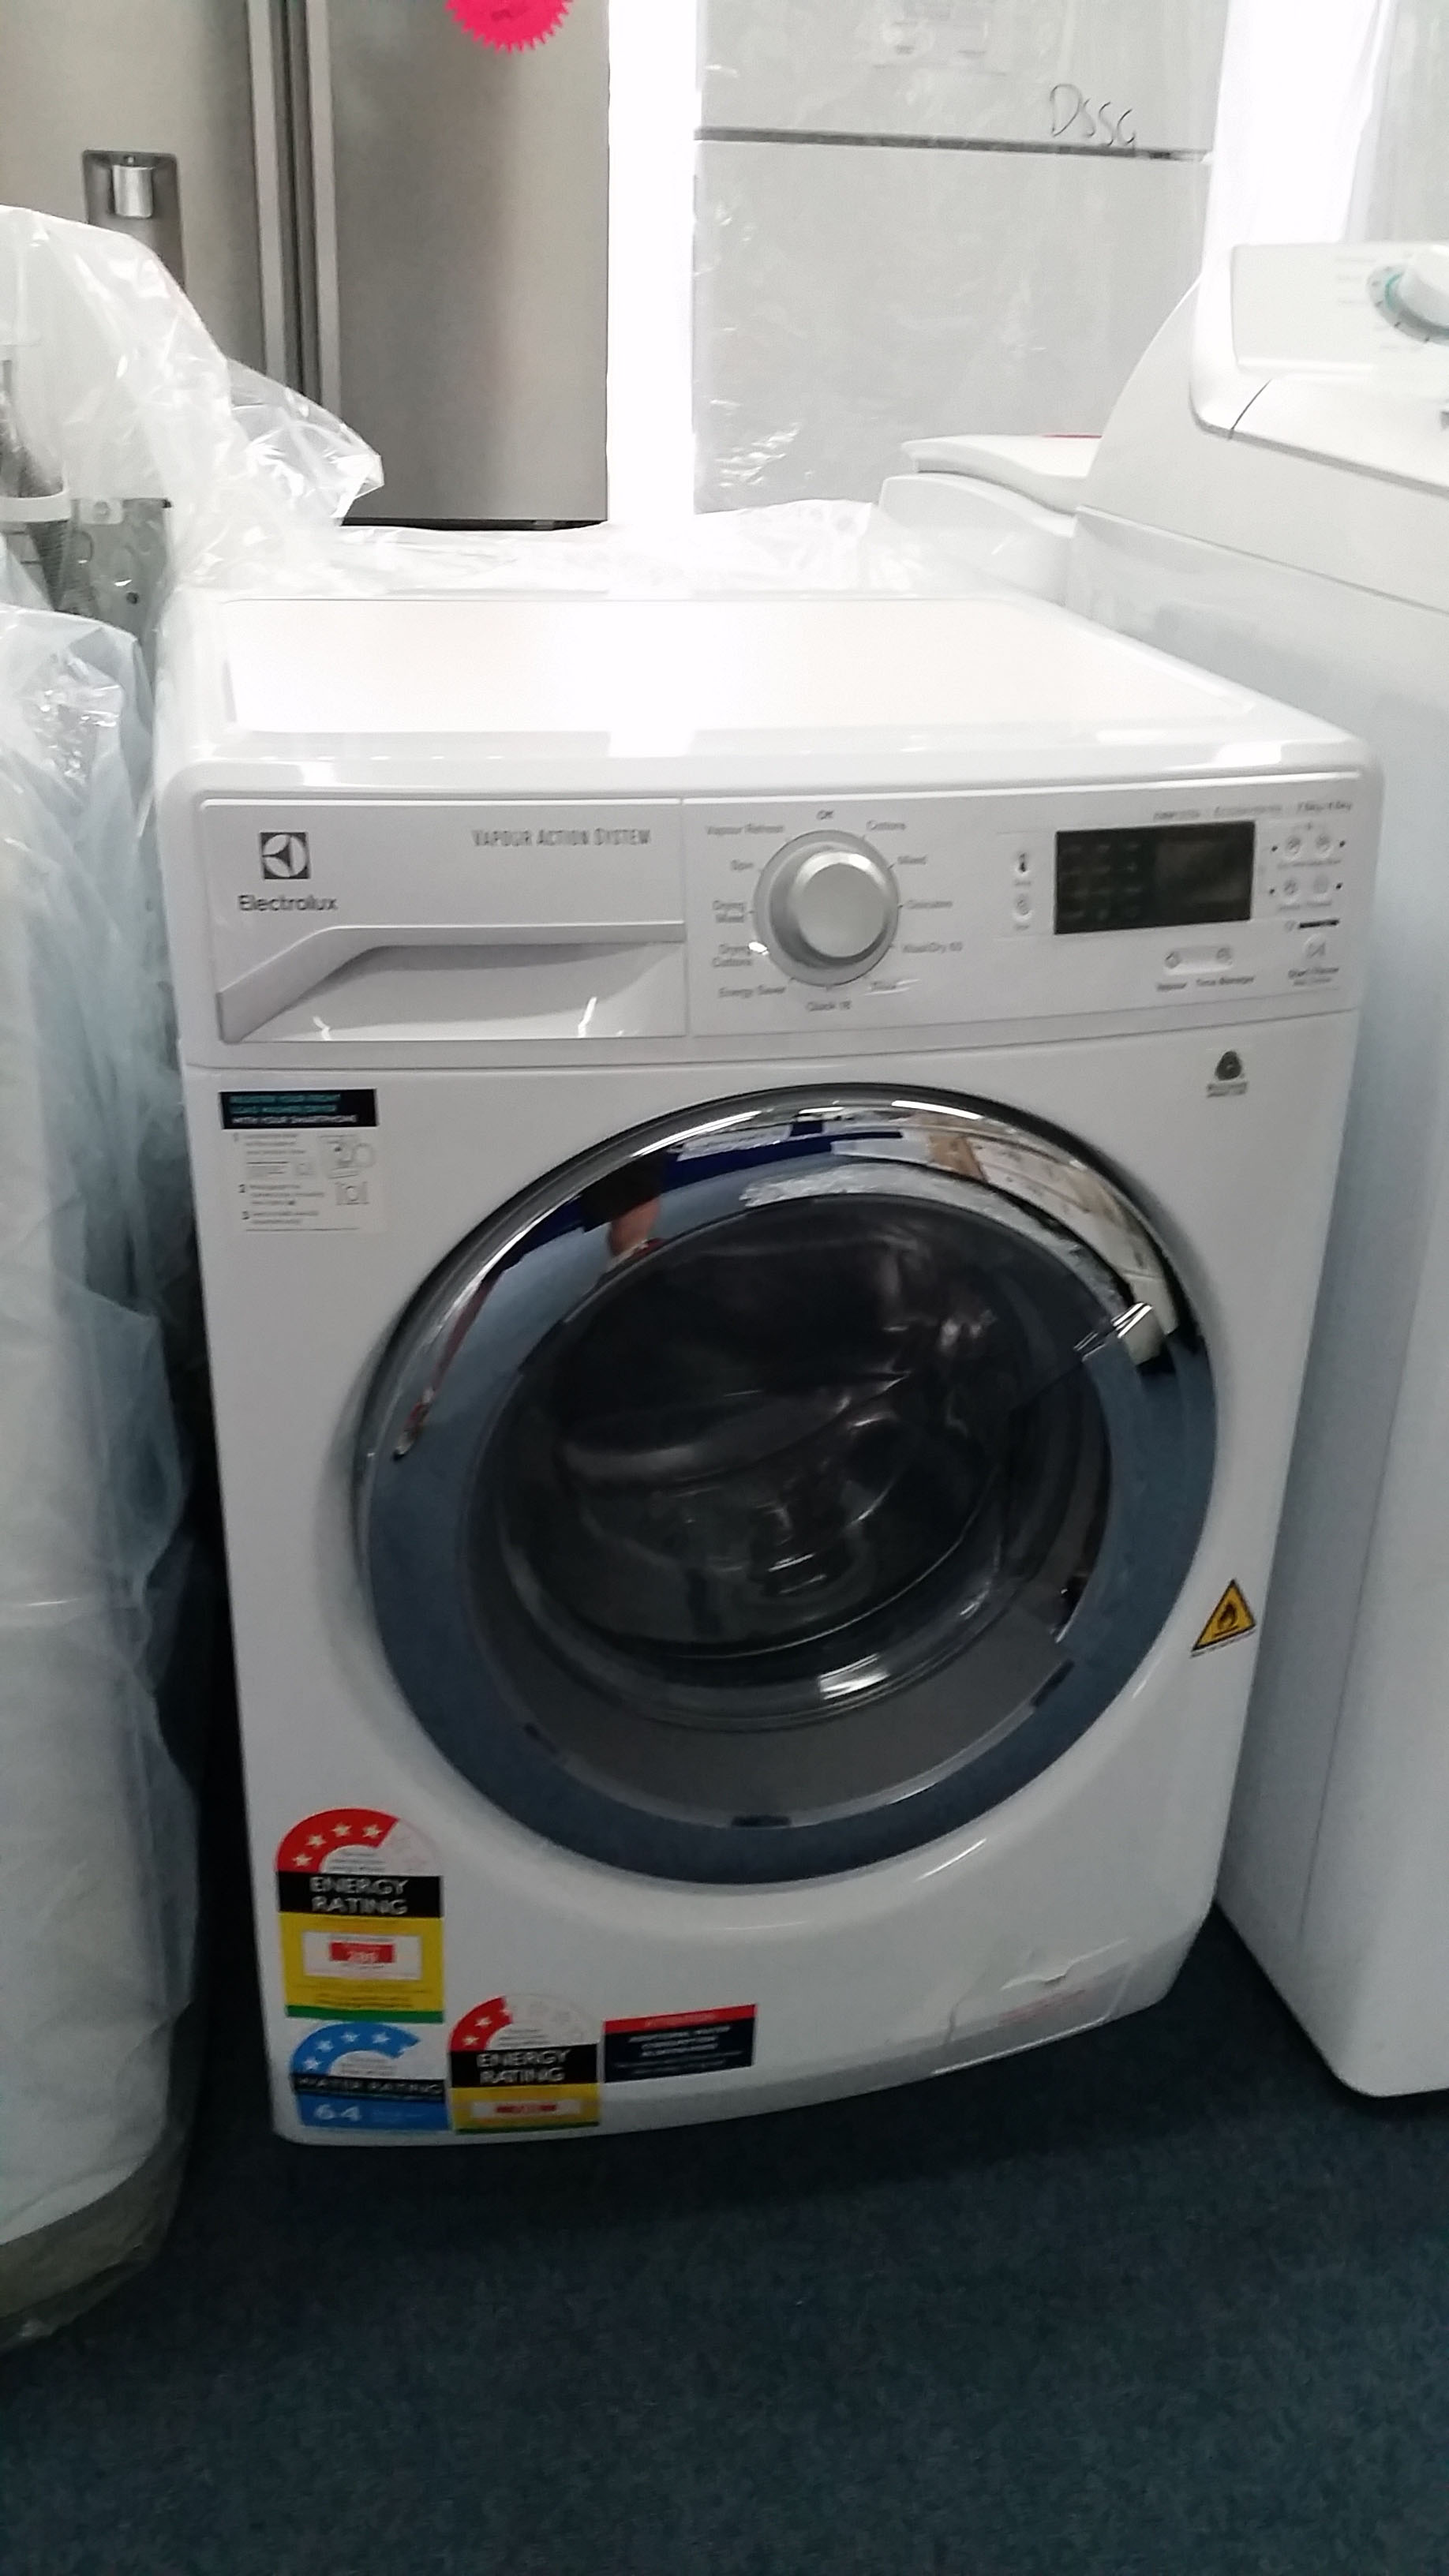 electrolux-eww12753-front-load-washer-dryer-best-price-in-sydney-s-west